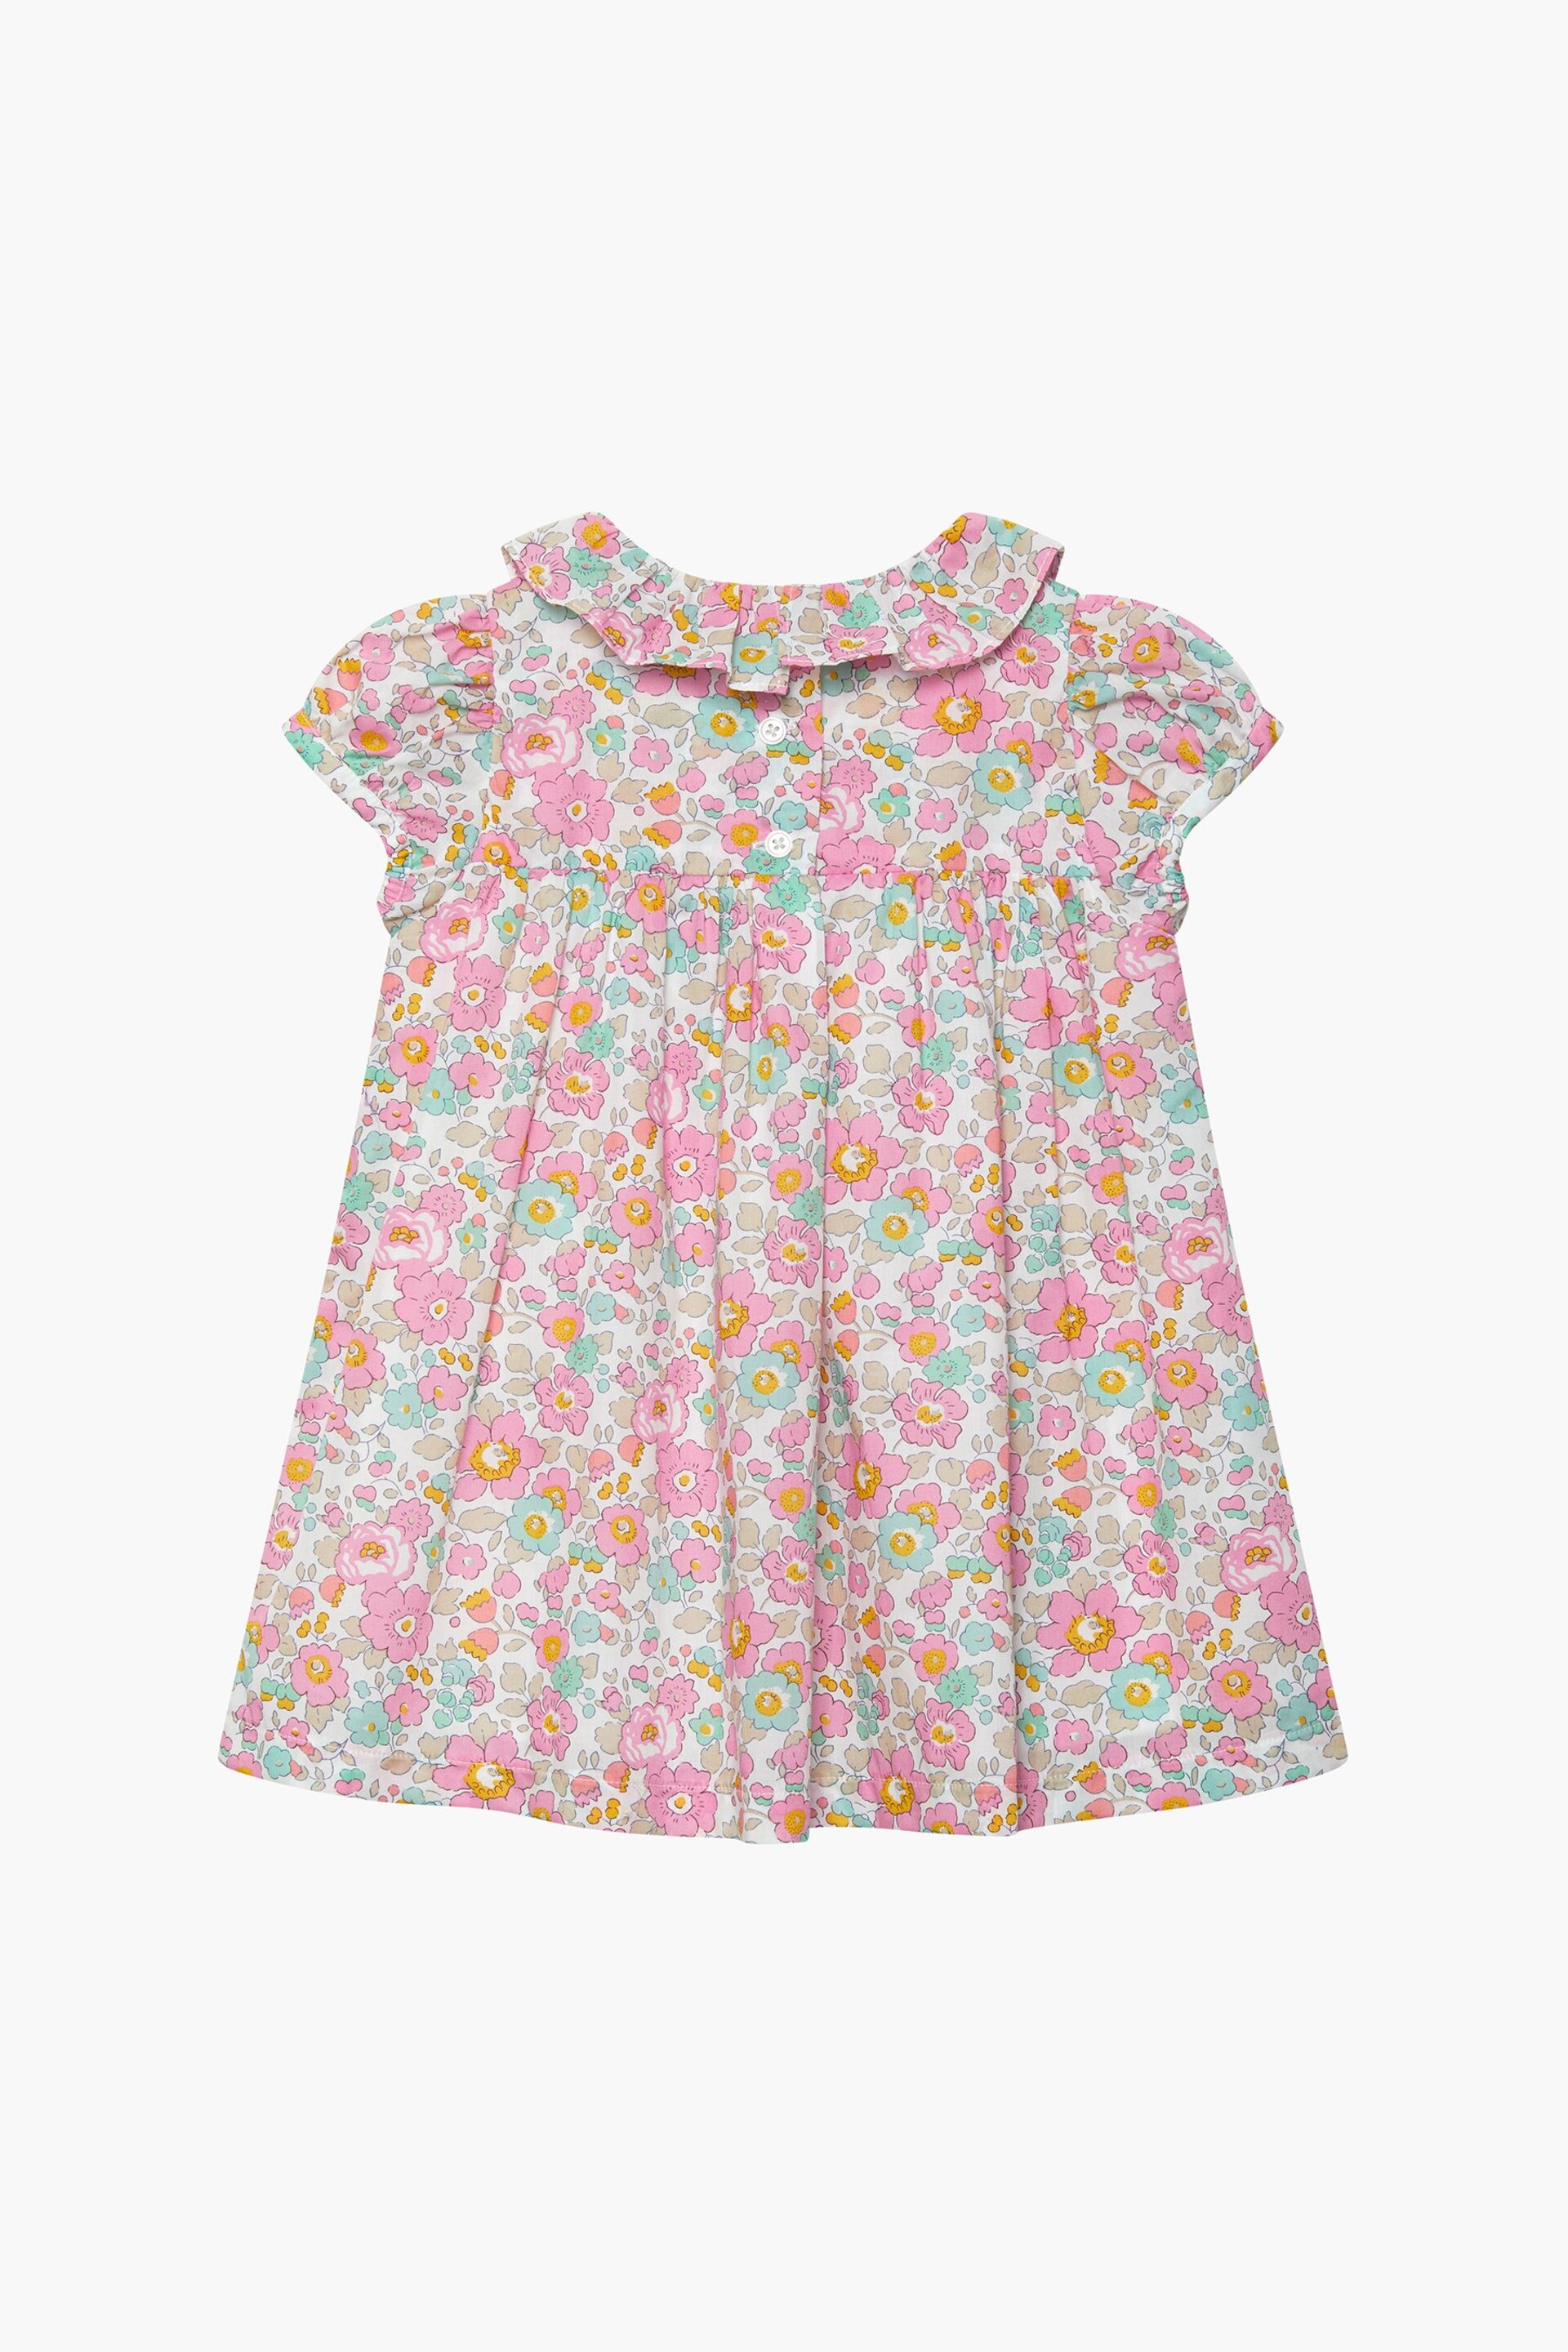 Trotters London Pink Little Liberty Print Coral Betsy Cotton Willow Dress - Image 3 of 4